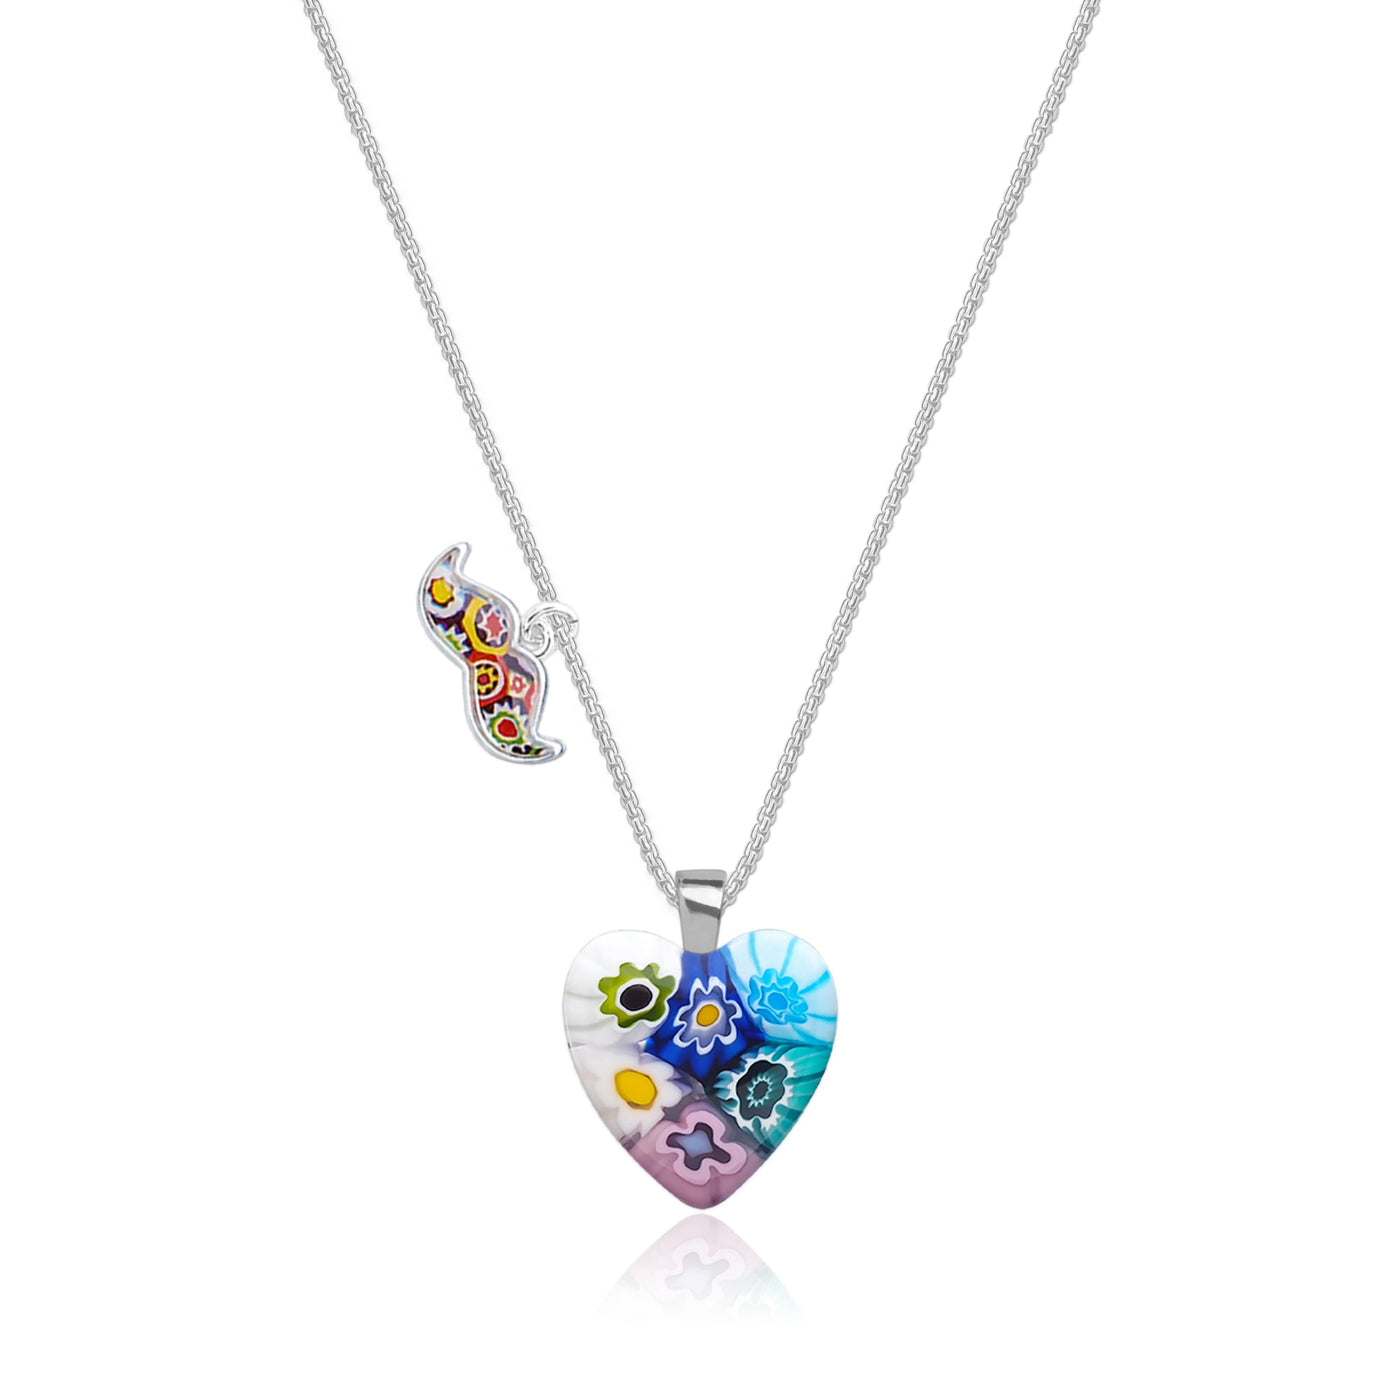 Six in Bloom Heart Necklace - 1mm 925 Sterling Silver [Free upgrade] - Pendant Necklace